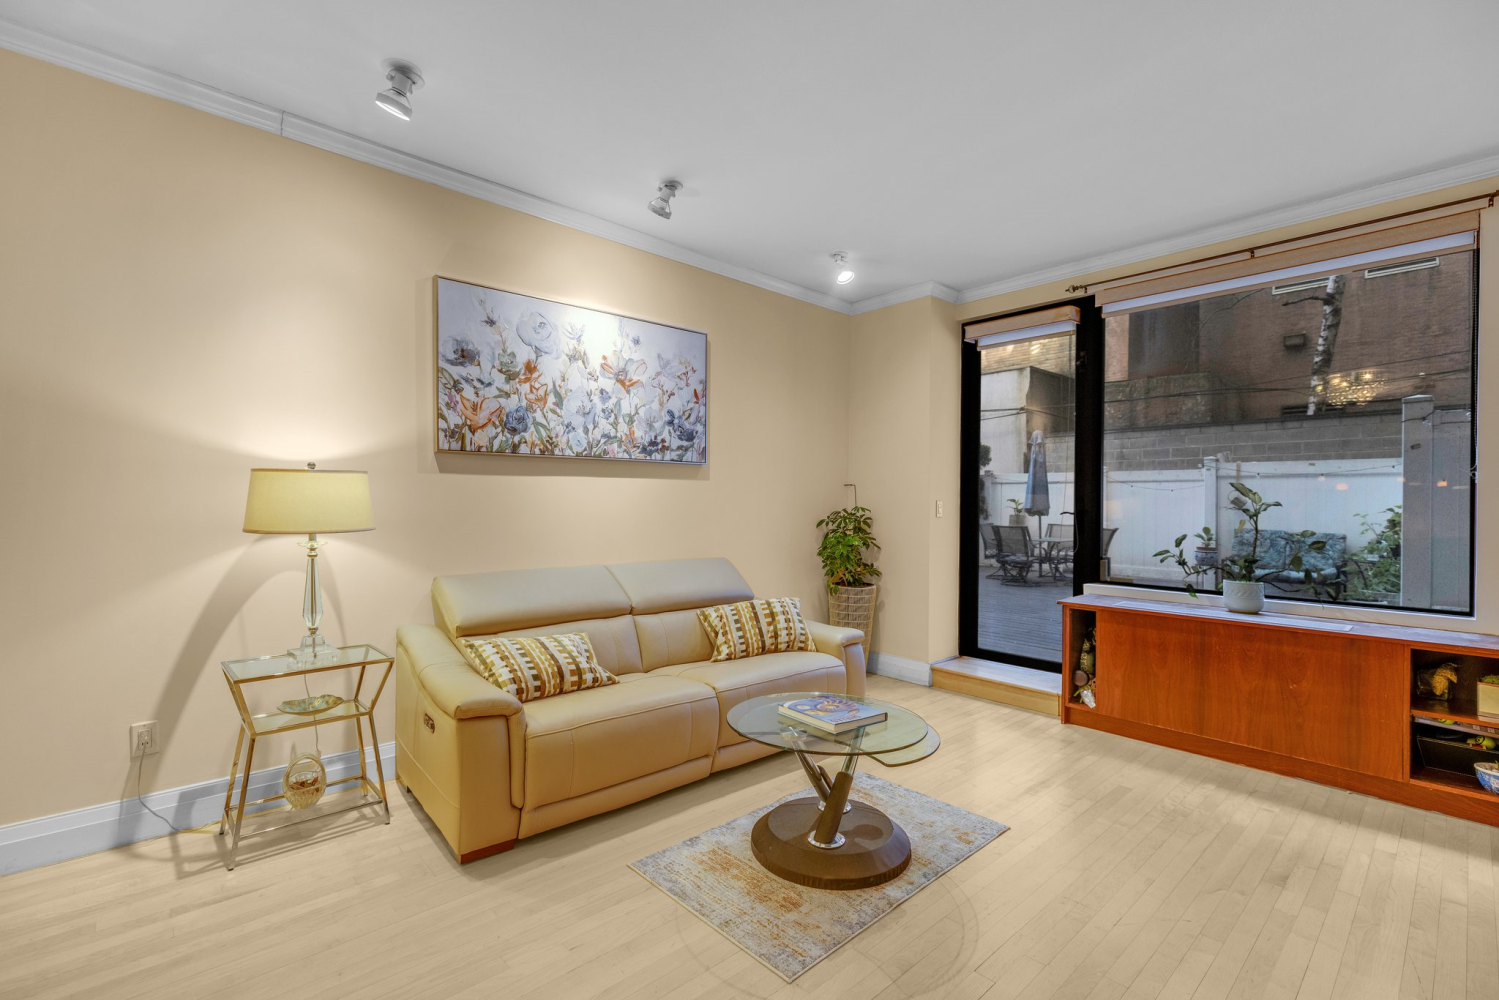 212 East 95th Street 1B, Yorkville, Upper East Side, NYC - 2 Bedrooms  
2 Bathrooms  
6 Rooms - 